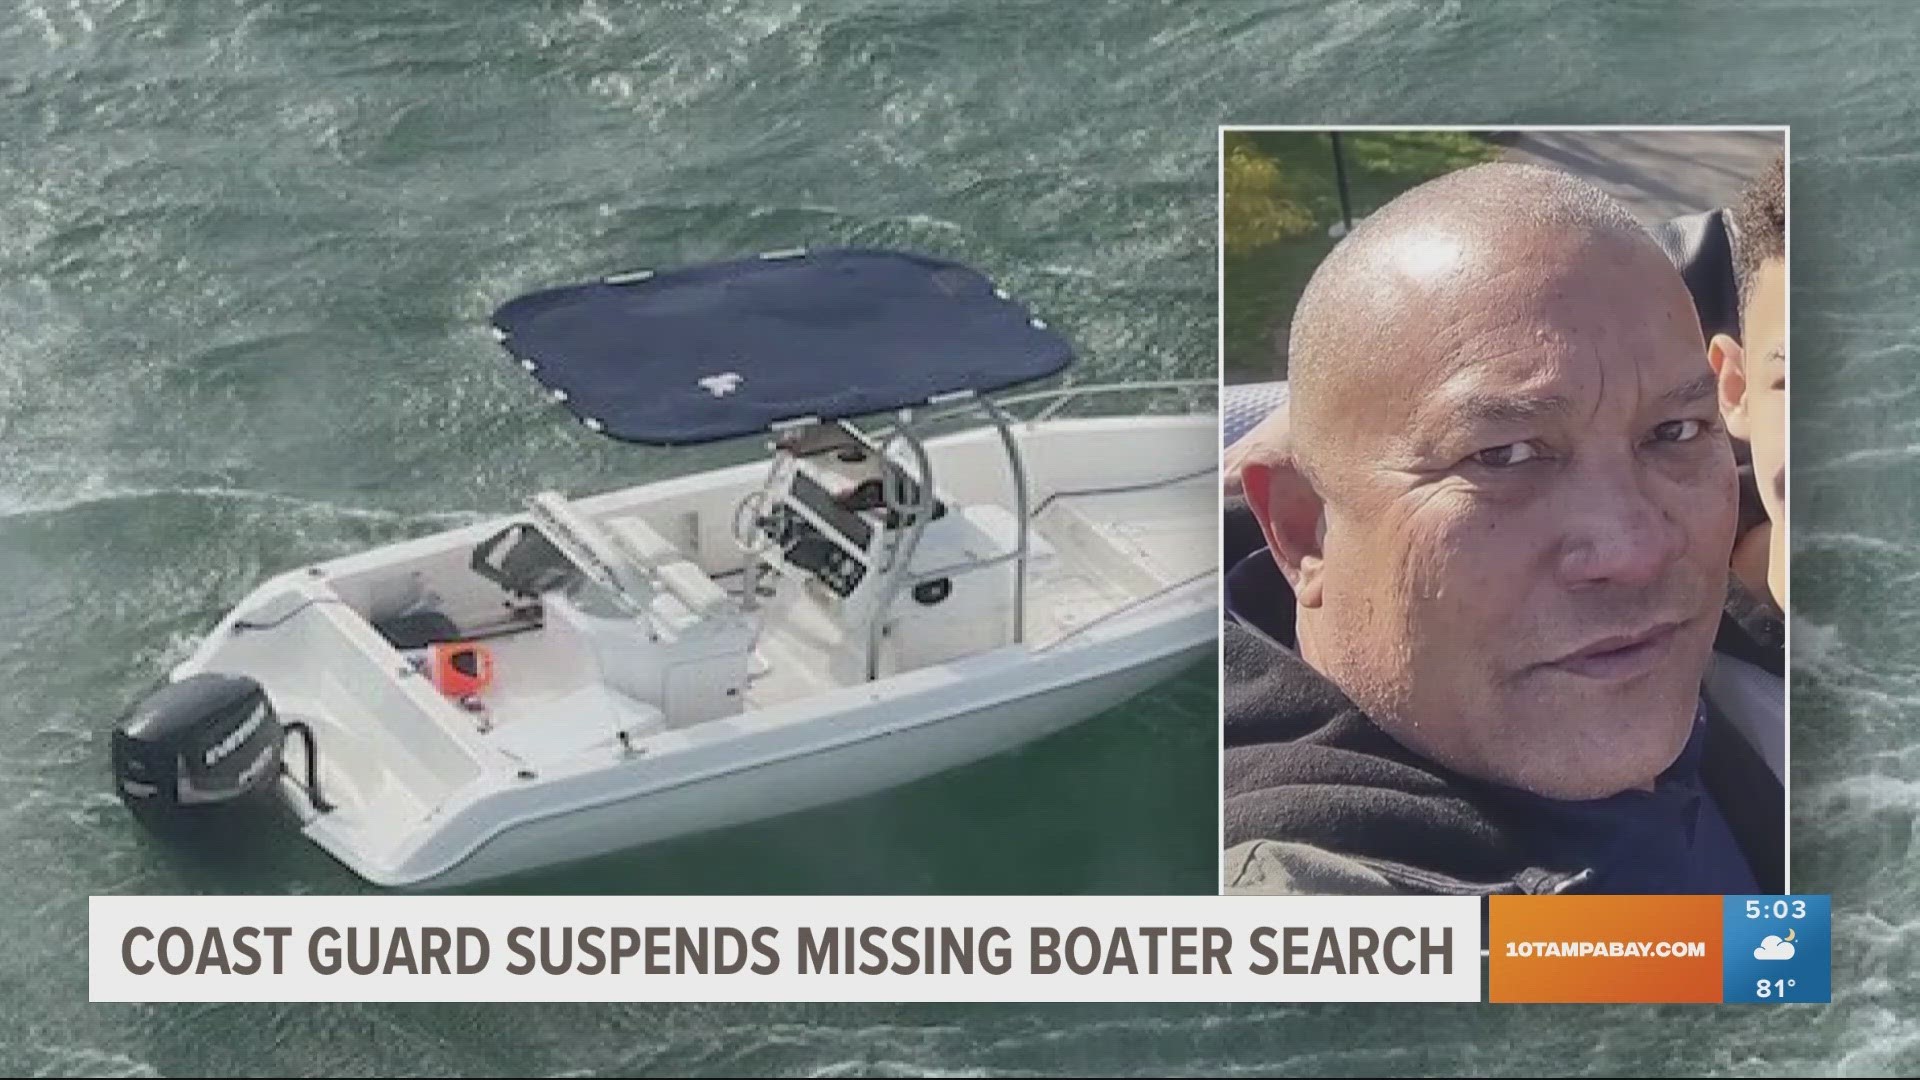 Andre Nolasco, 57, launched his boat from Nick's Park Sunday morning in Port Richey, but has been missing since.